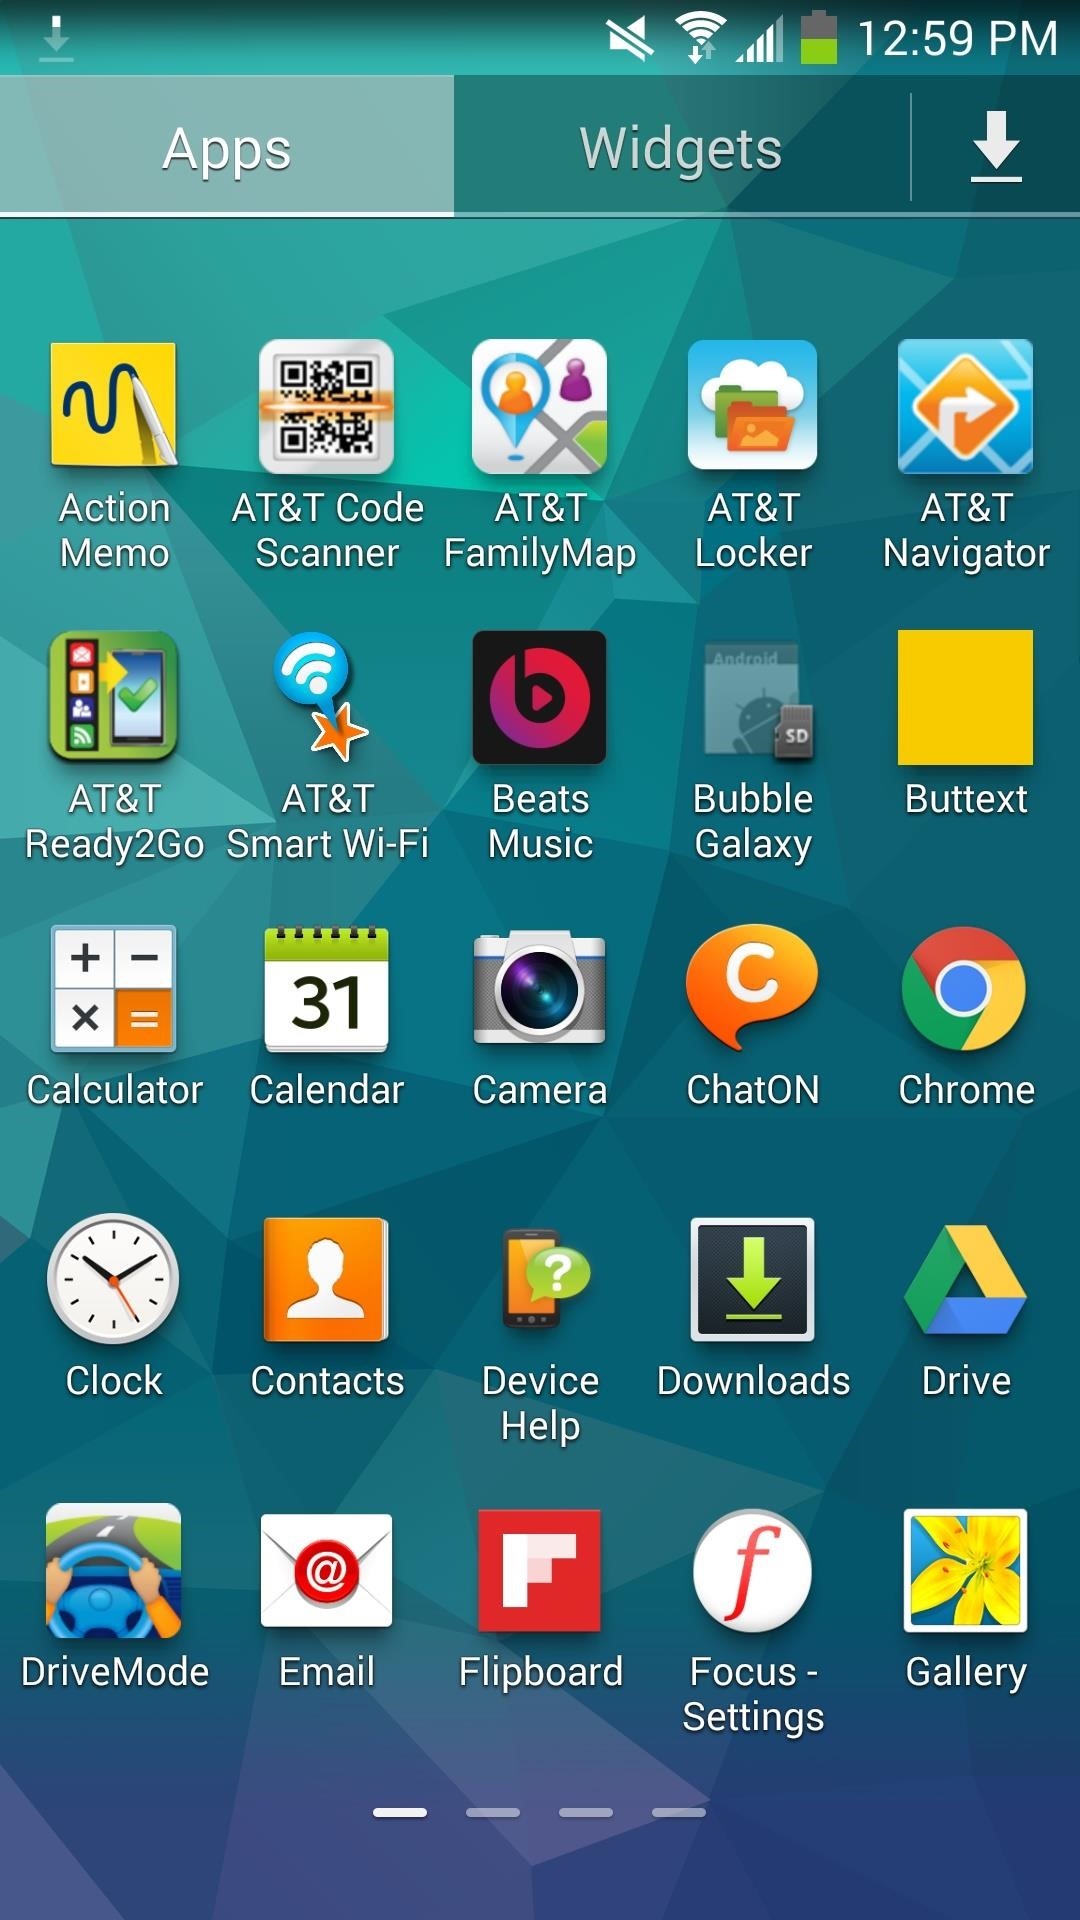 Remove Bloatware Apps on Your Galaxy Note 3 (AT&T Variant Only)